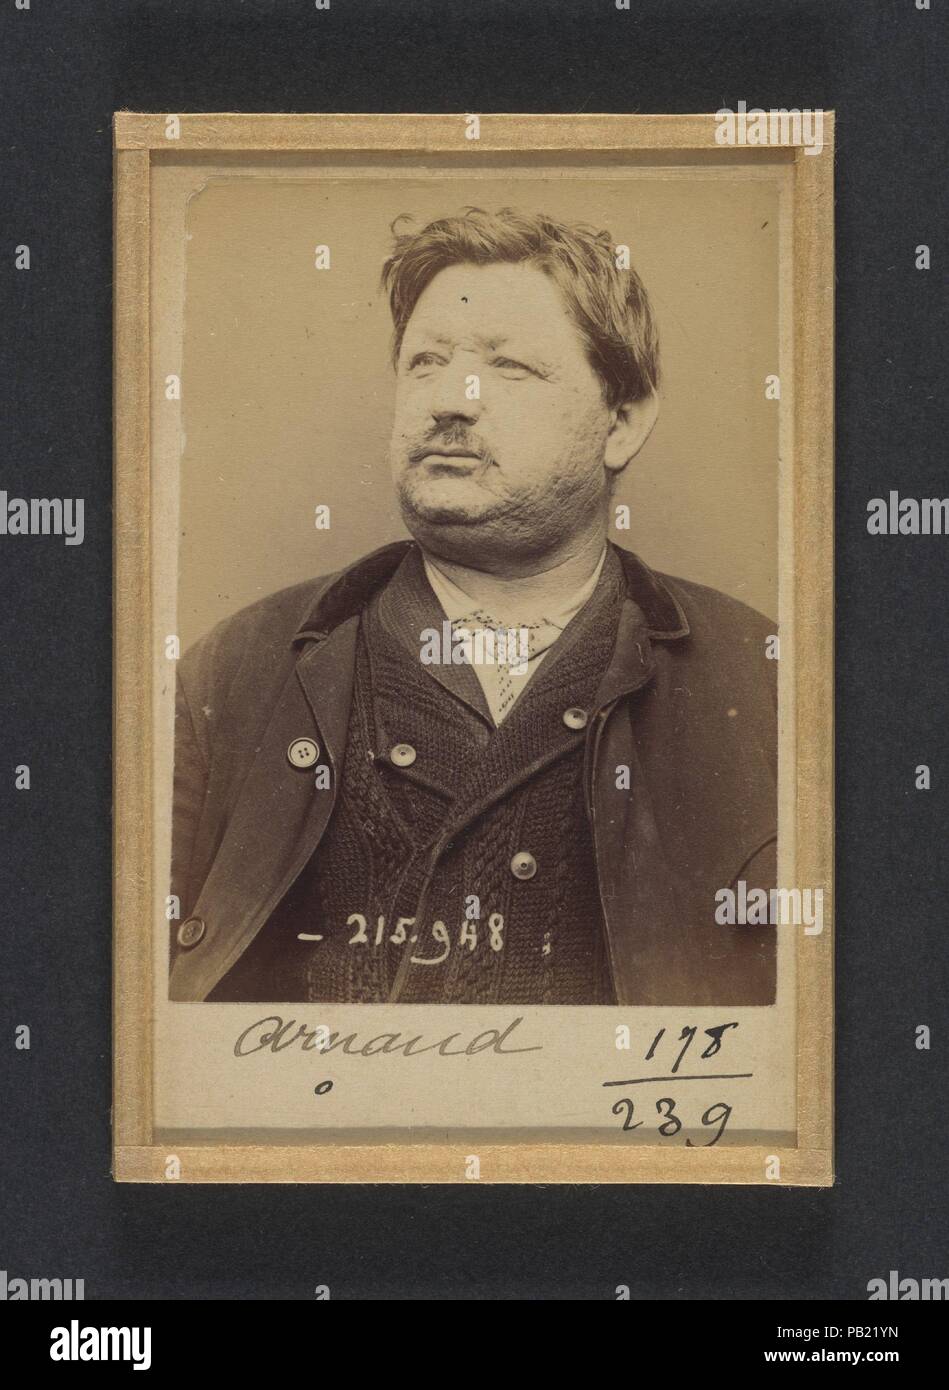 Arnaud. Eugène. 47 ans, né à Villeveyrac (Hérault). Ferblantier. Anarchiste. 20/3/94. Artist: Alphonse Bertillon (French, 1853-1914). Dimensions: 10.5 x 7 x 0.5 cm (4 1/8 x 2 3/4 x 3/16 in.) each. Date: 1894.  Born into a distinguished family of scientists and statisticians, Bertillon began his career as a clerk in the Identification Bureau of the Paris Prefecture of Police in 1879. Tasked with maintaining reliable police records of offenders, he developed the first modern system of criminal identification. The system, which became known as Bertillonage, had three components: anthropometric me Stock Photo